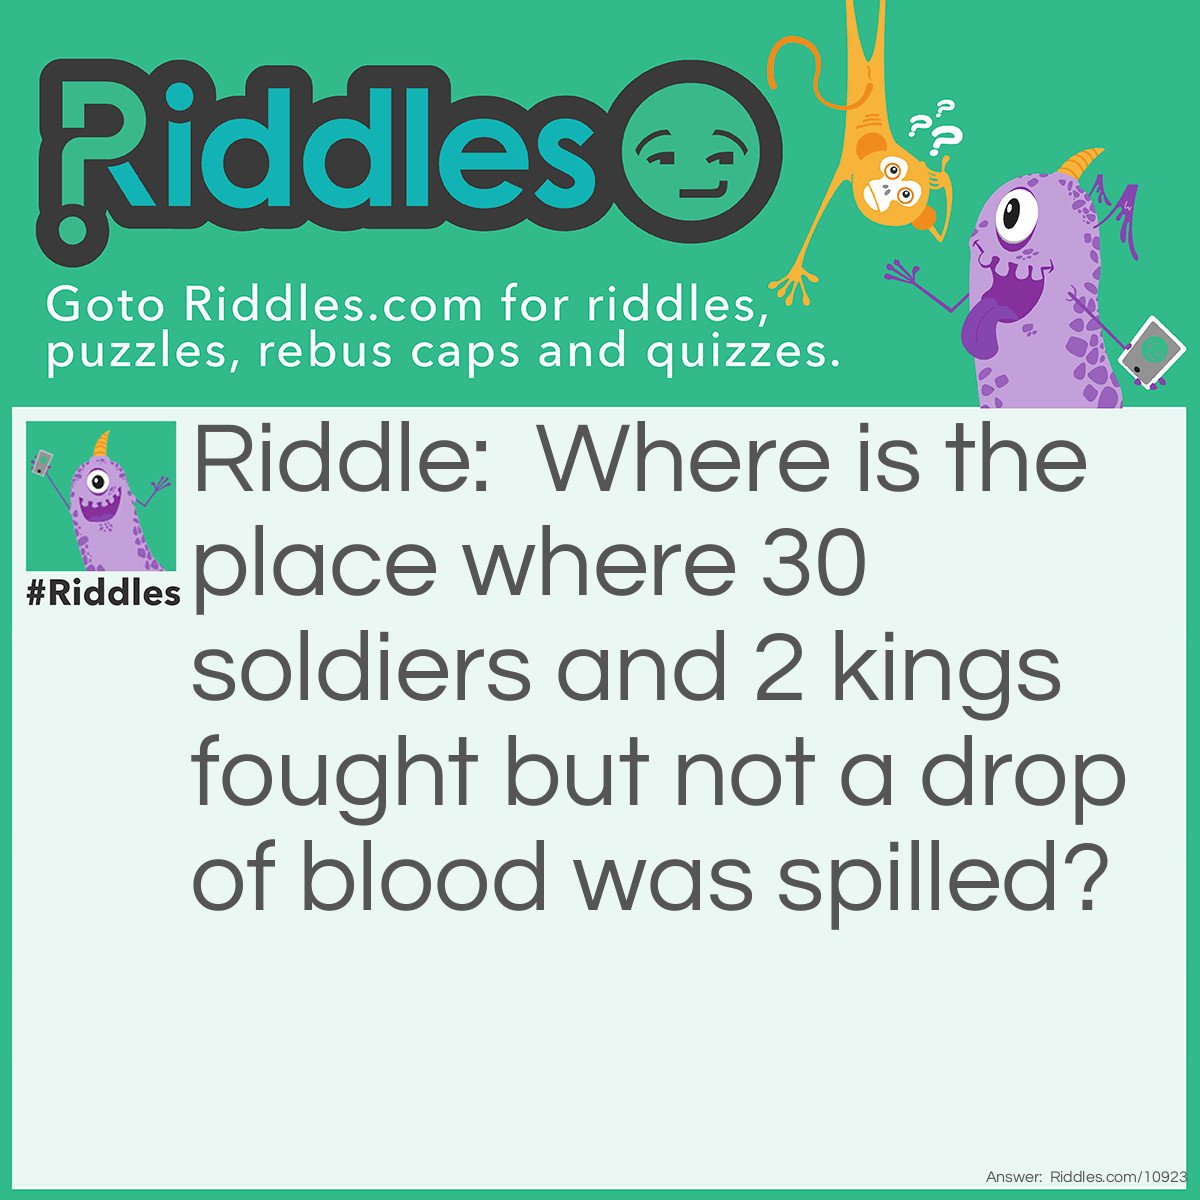 Riddle: Where is the place where 30 soldiers and 2 kings fought but not a drop of blood was spilled? Answer: A chessboard.